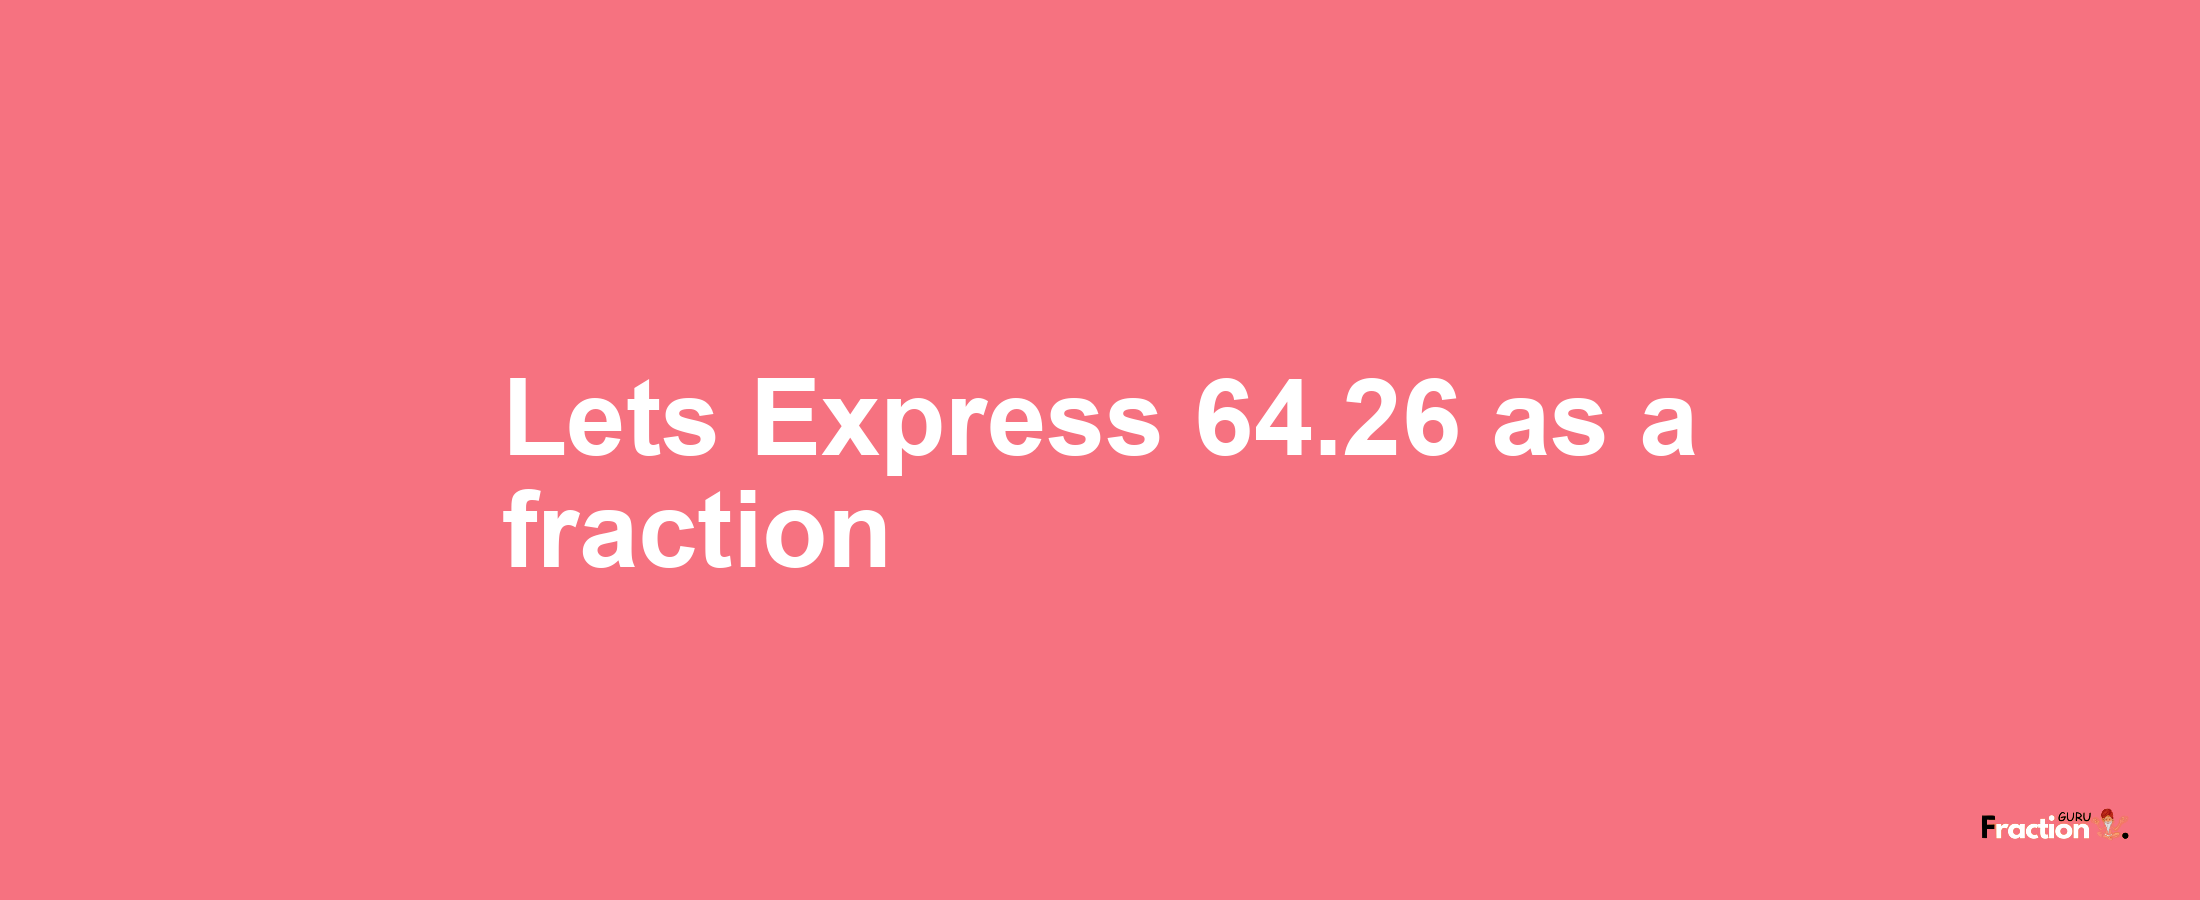 Lets Express 64.26 as afraction